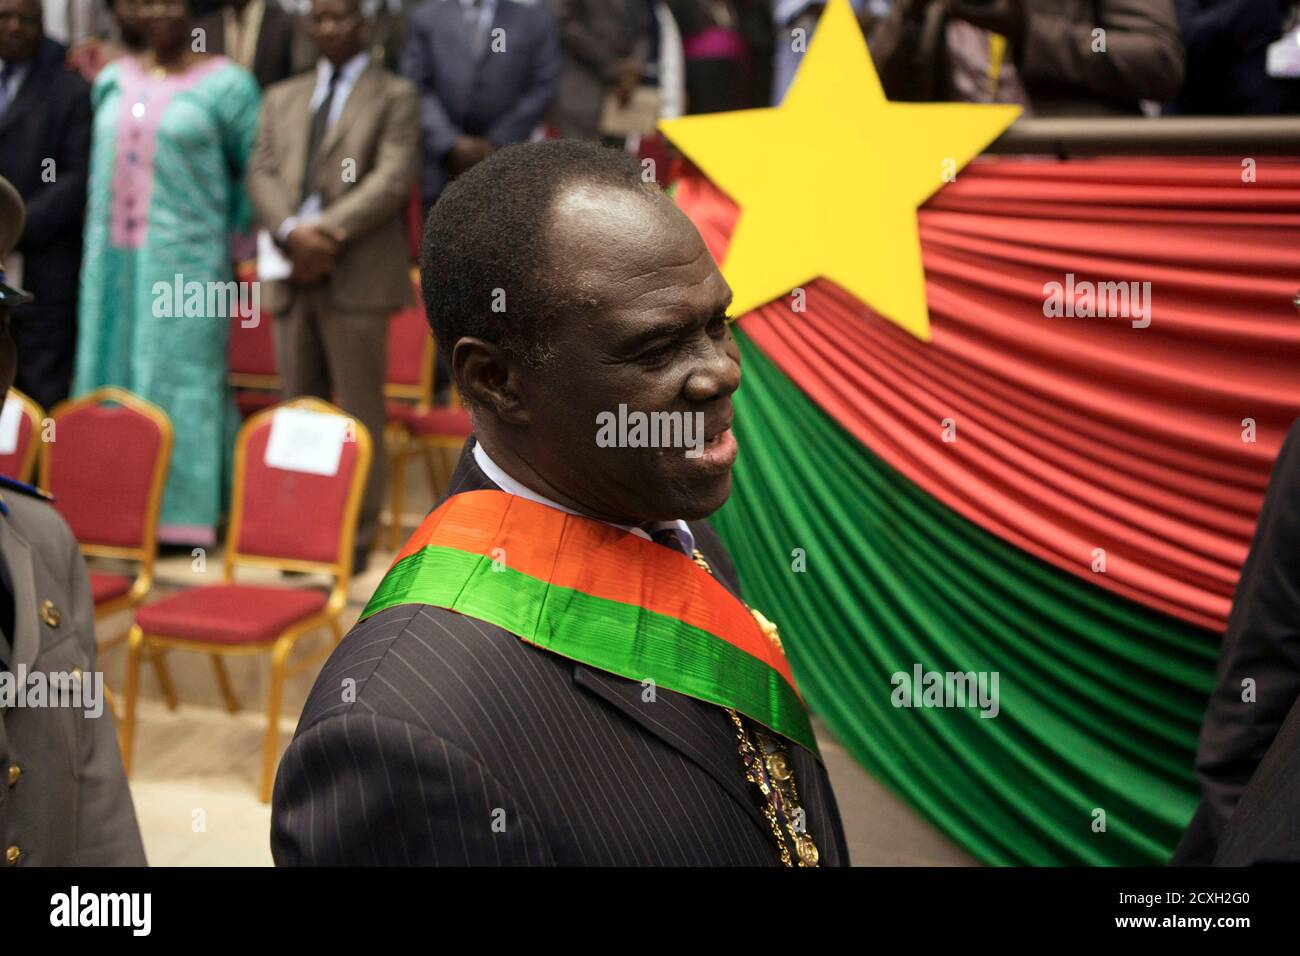 Burkina Faso's President Michel Kafondo is seen after being sworn into his post for the transitional period of one year, in Ouagadougou November 21, 2014. Kafando was chosen by a committee on Monday set up after former president Blaise Compaore resigned and fled on October 31 in the face of mass protests against his attempt to change the constitution and extend his 27-year rule. Kafondo is faced with the task of leading the West African country to elections in a year following a brief military takeover.    REUTERS/Joe Penney (BURKINA FASO - Tags: POLITICS) Stock Photo